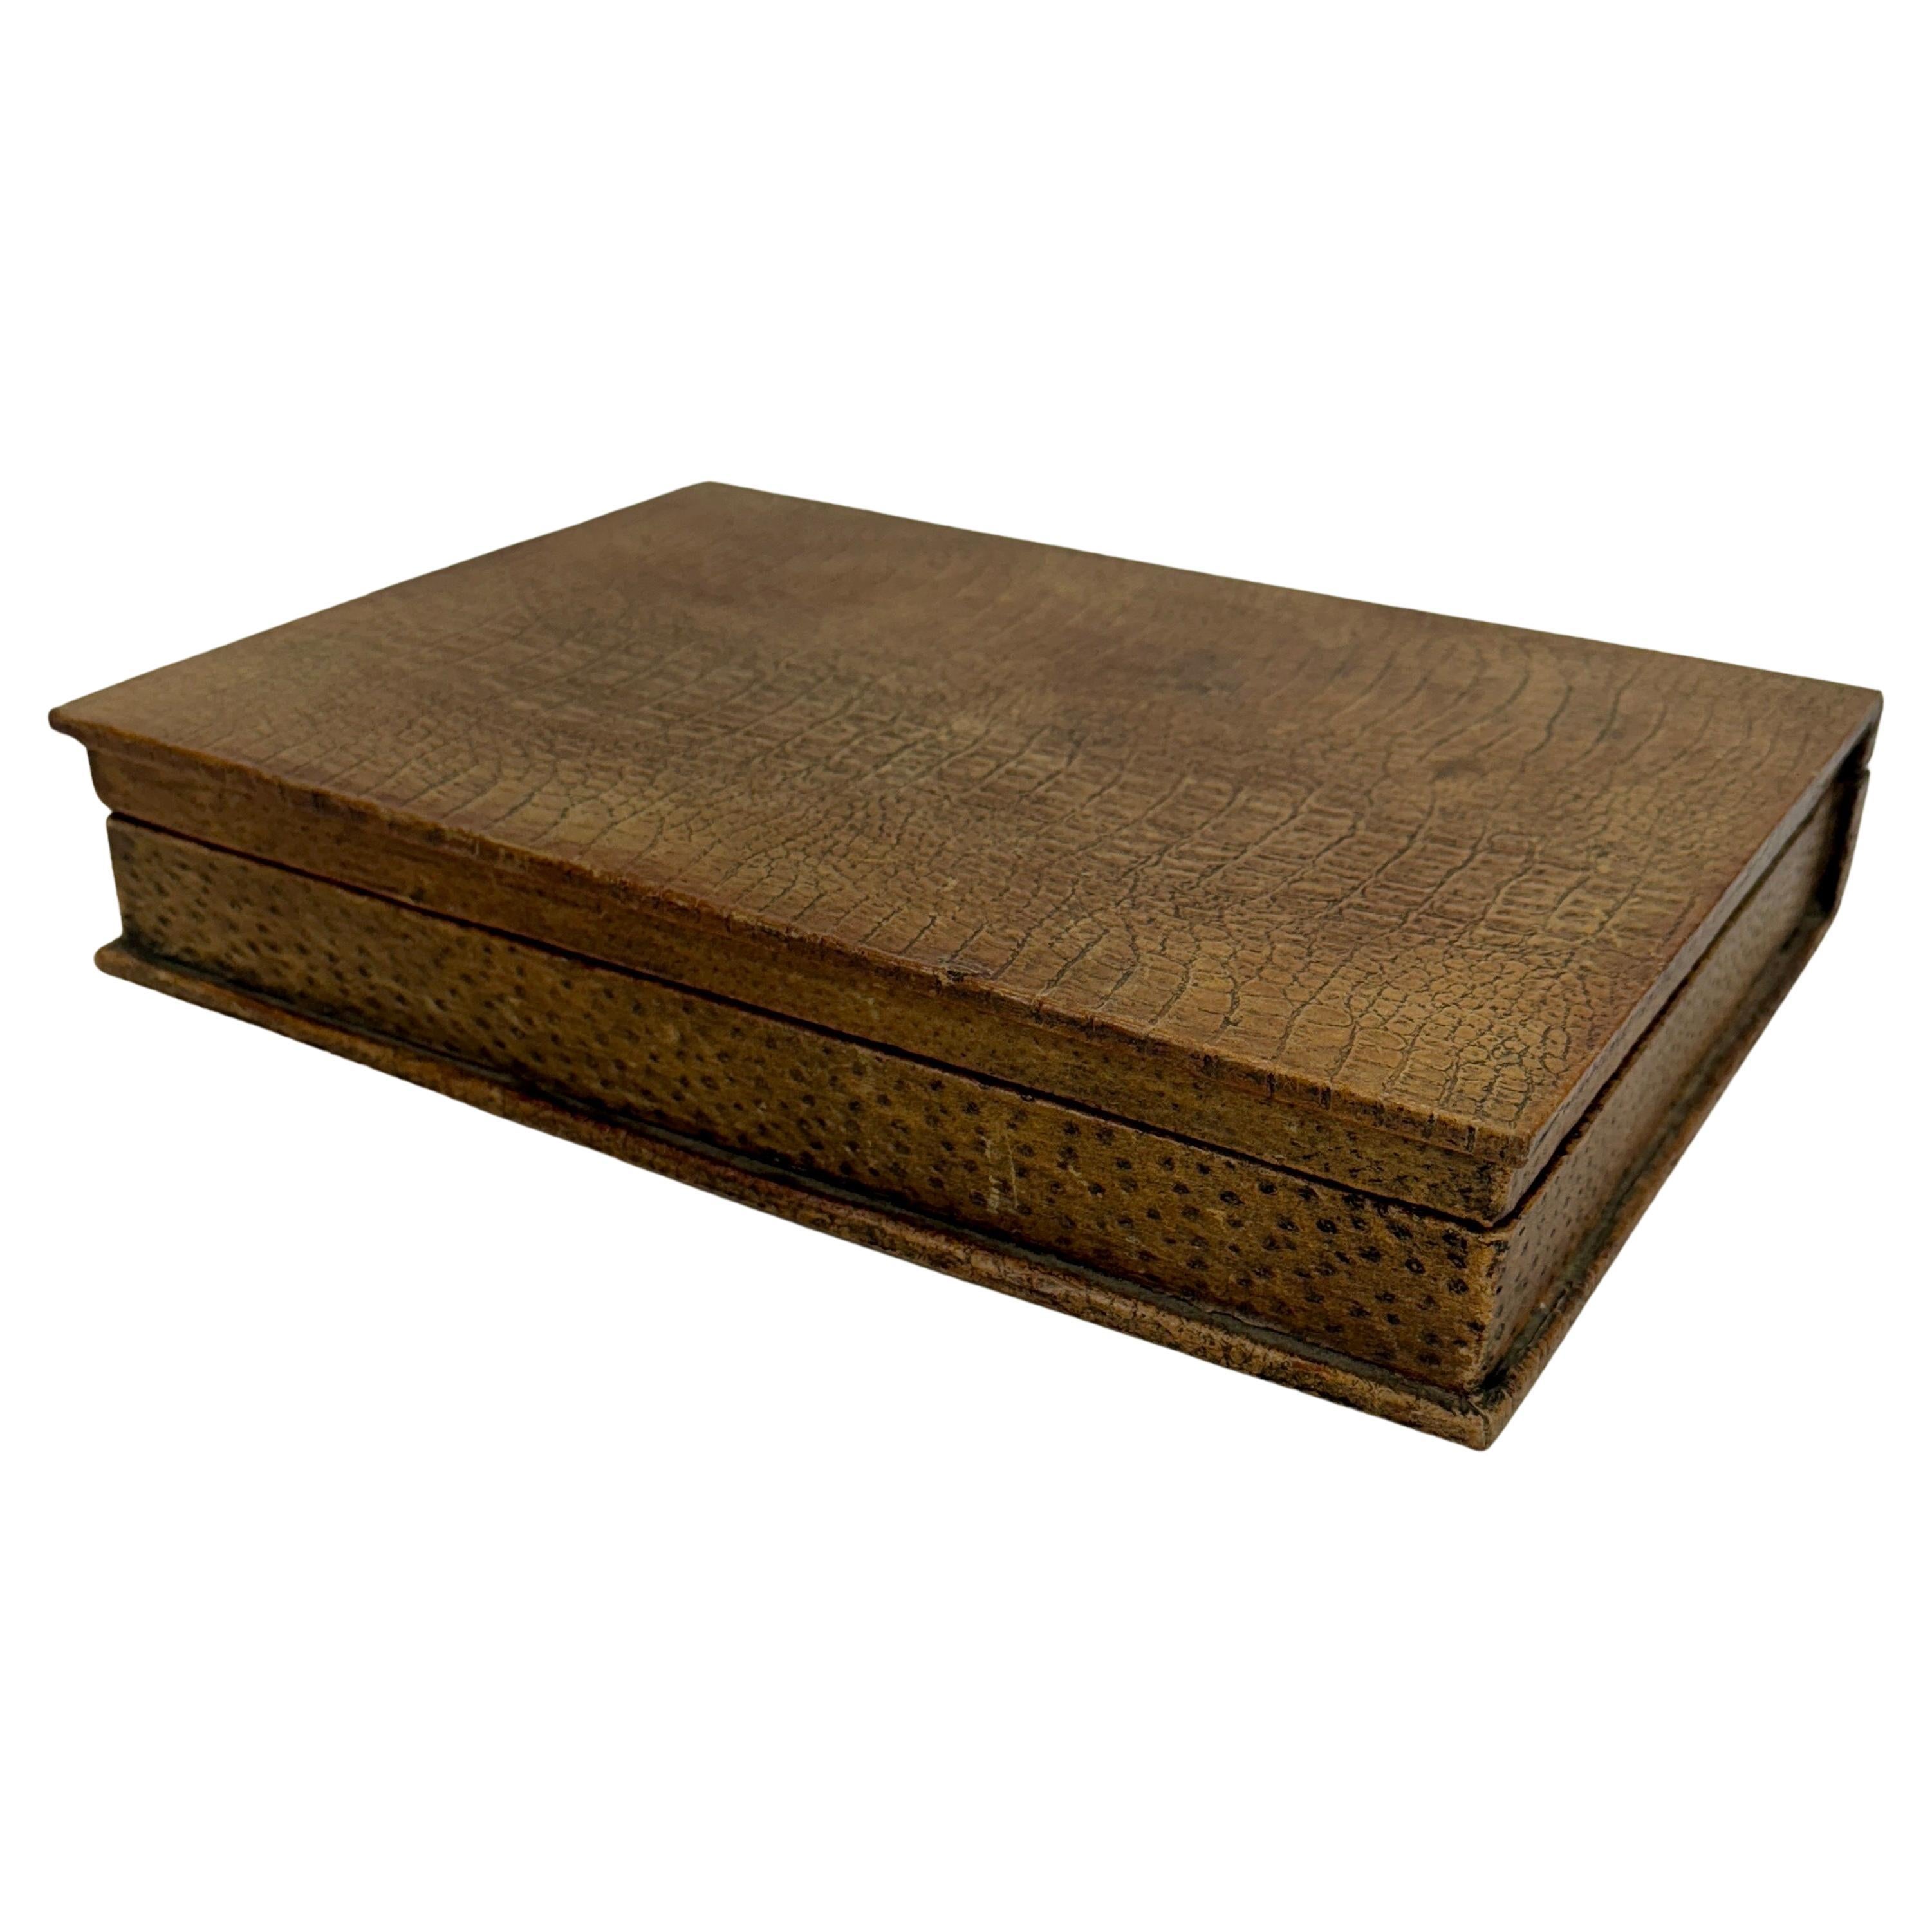 Early French Rectangular Alligator Jewelry Box For Sale 2